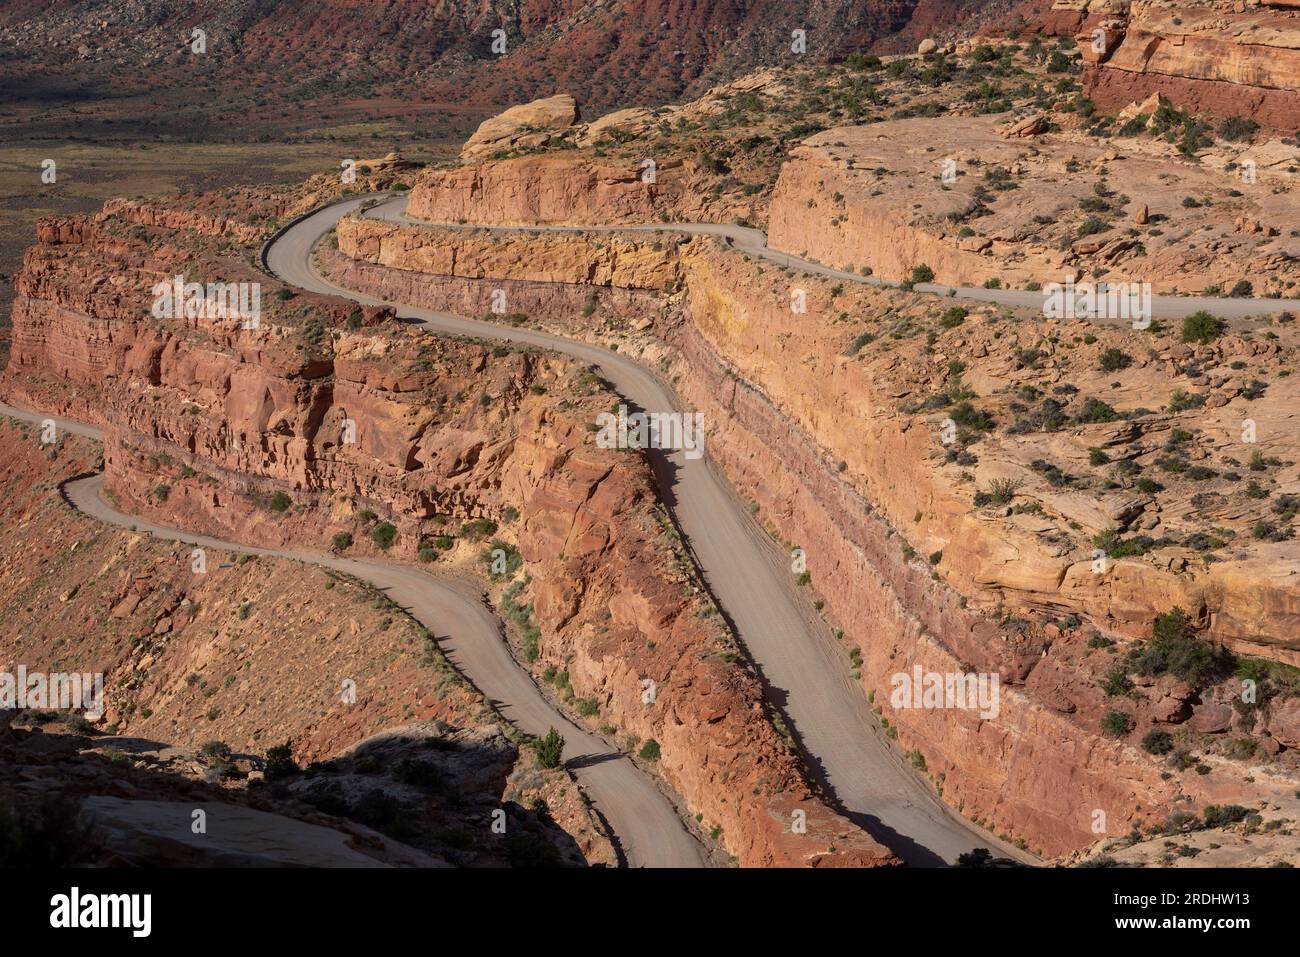 The Moki Dugway road in Utah, up from the valley floor via a treacherous road without railings. Stock Photo